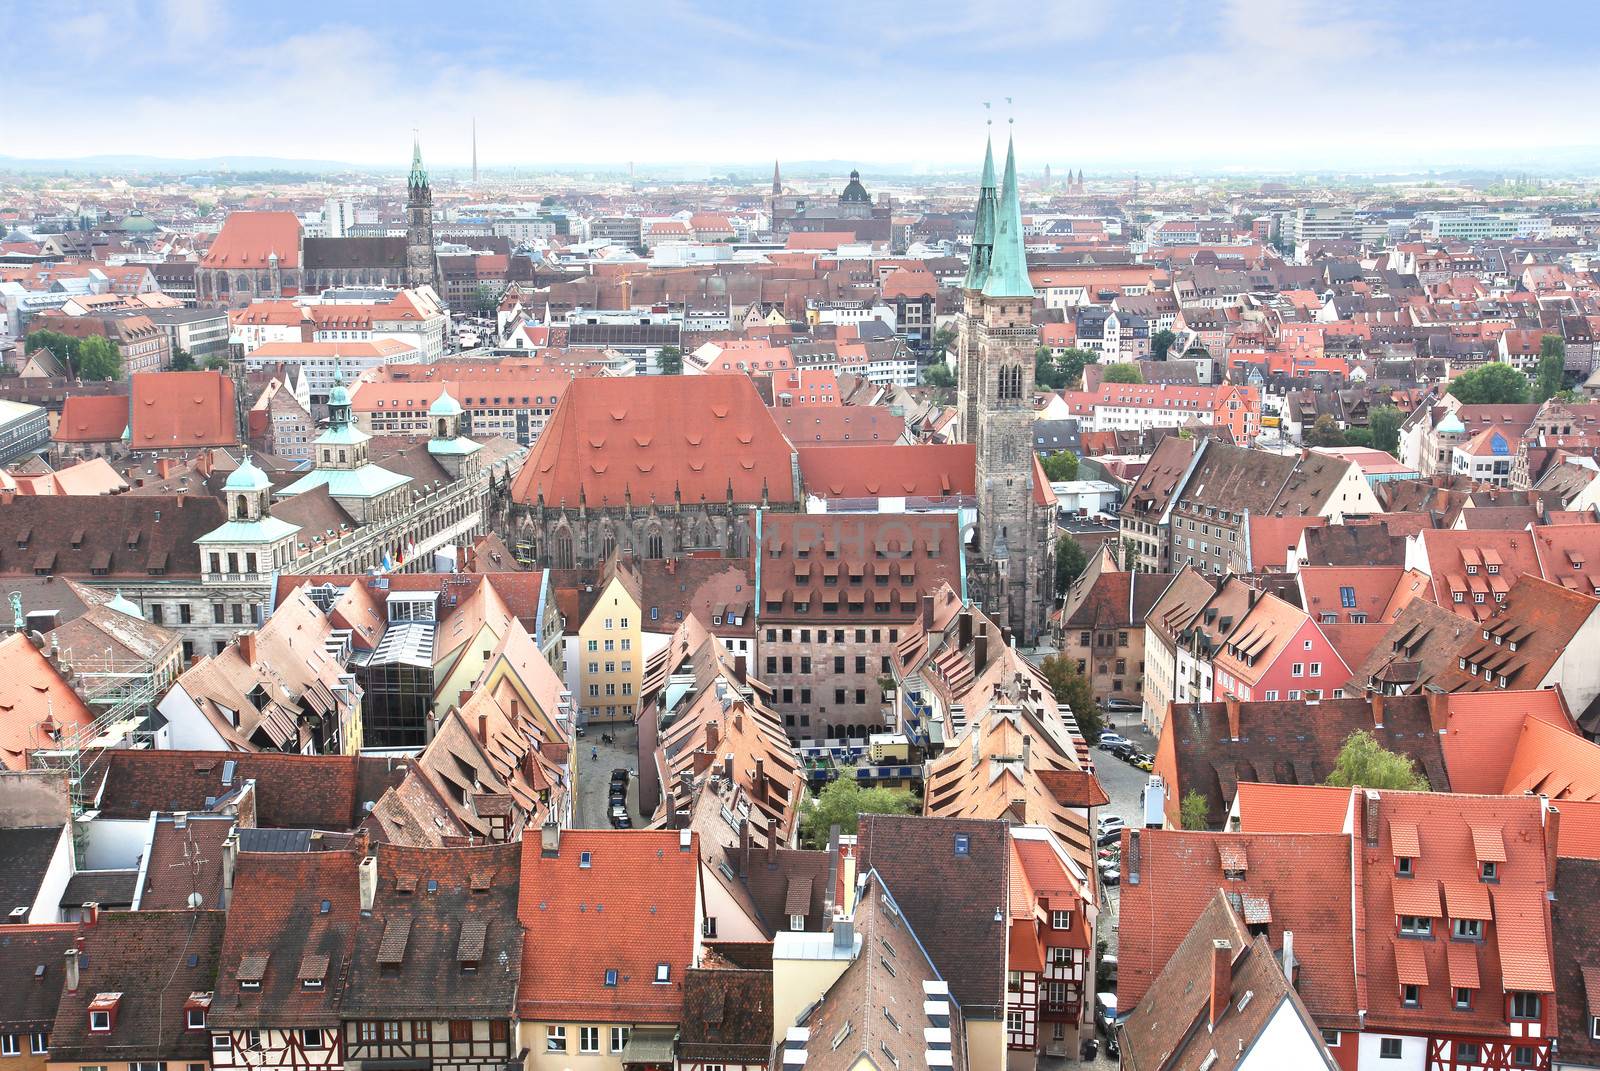 View over Nuremberg old town from the Kaiserburg, Franconia, Bavaria, Germany.